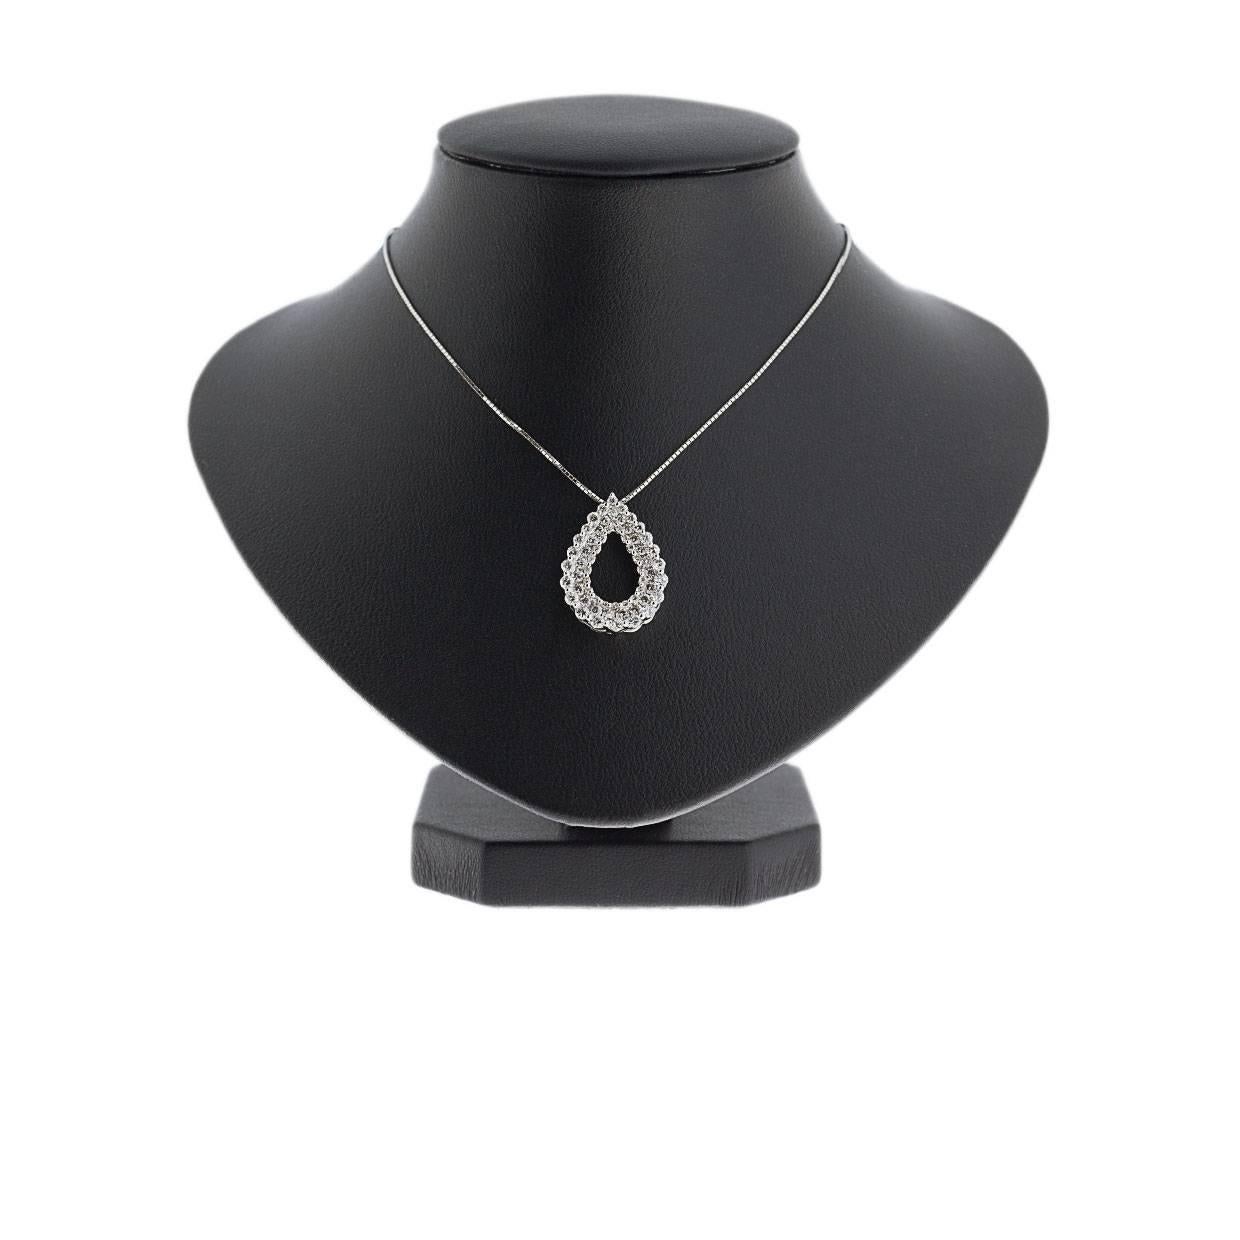 Simple yet elegant & beautiful would be the best way to describe this stunning pendant! It features sparkly round brilliant diamonds weighing 1.0 carat. The pendant is attached to an 18 karat white gold, 18